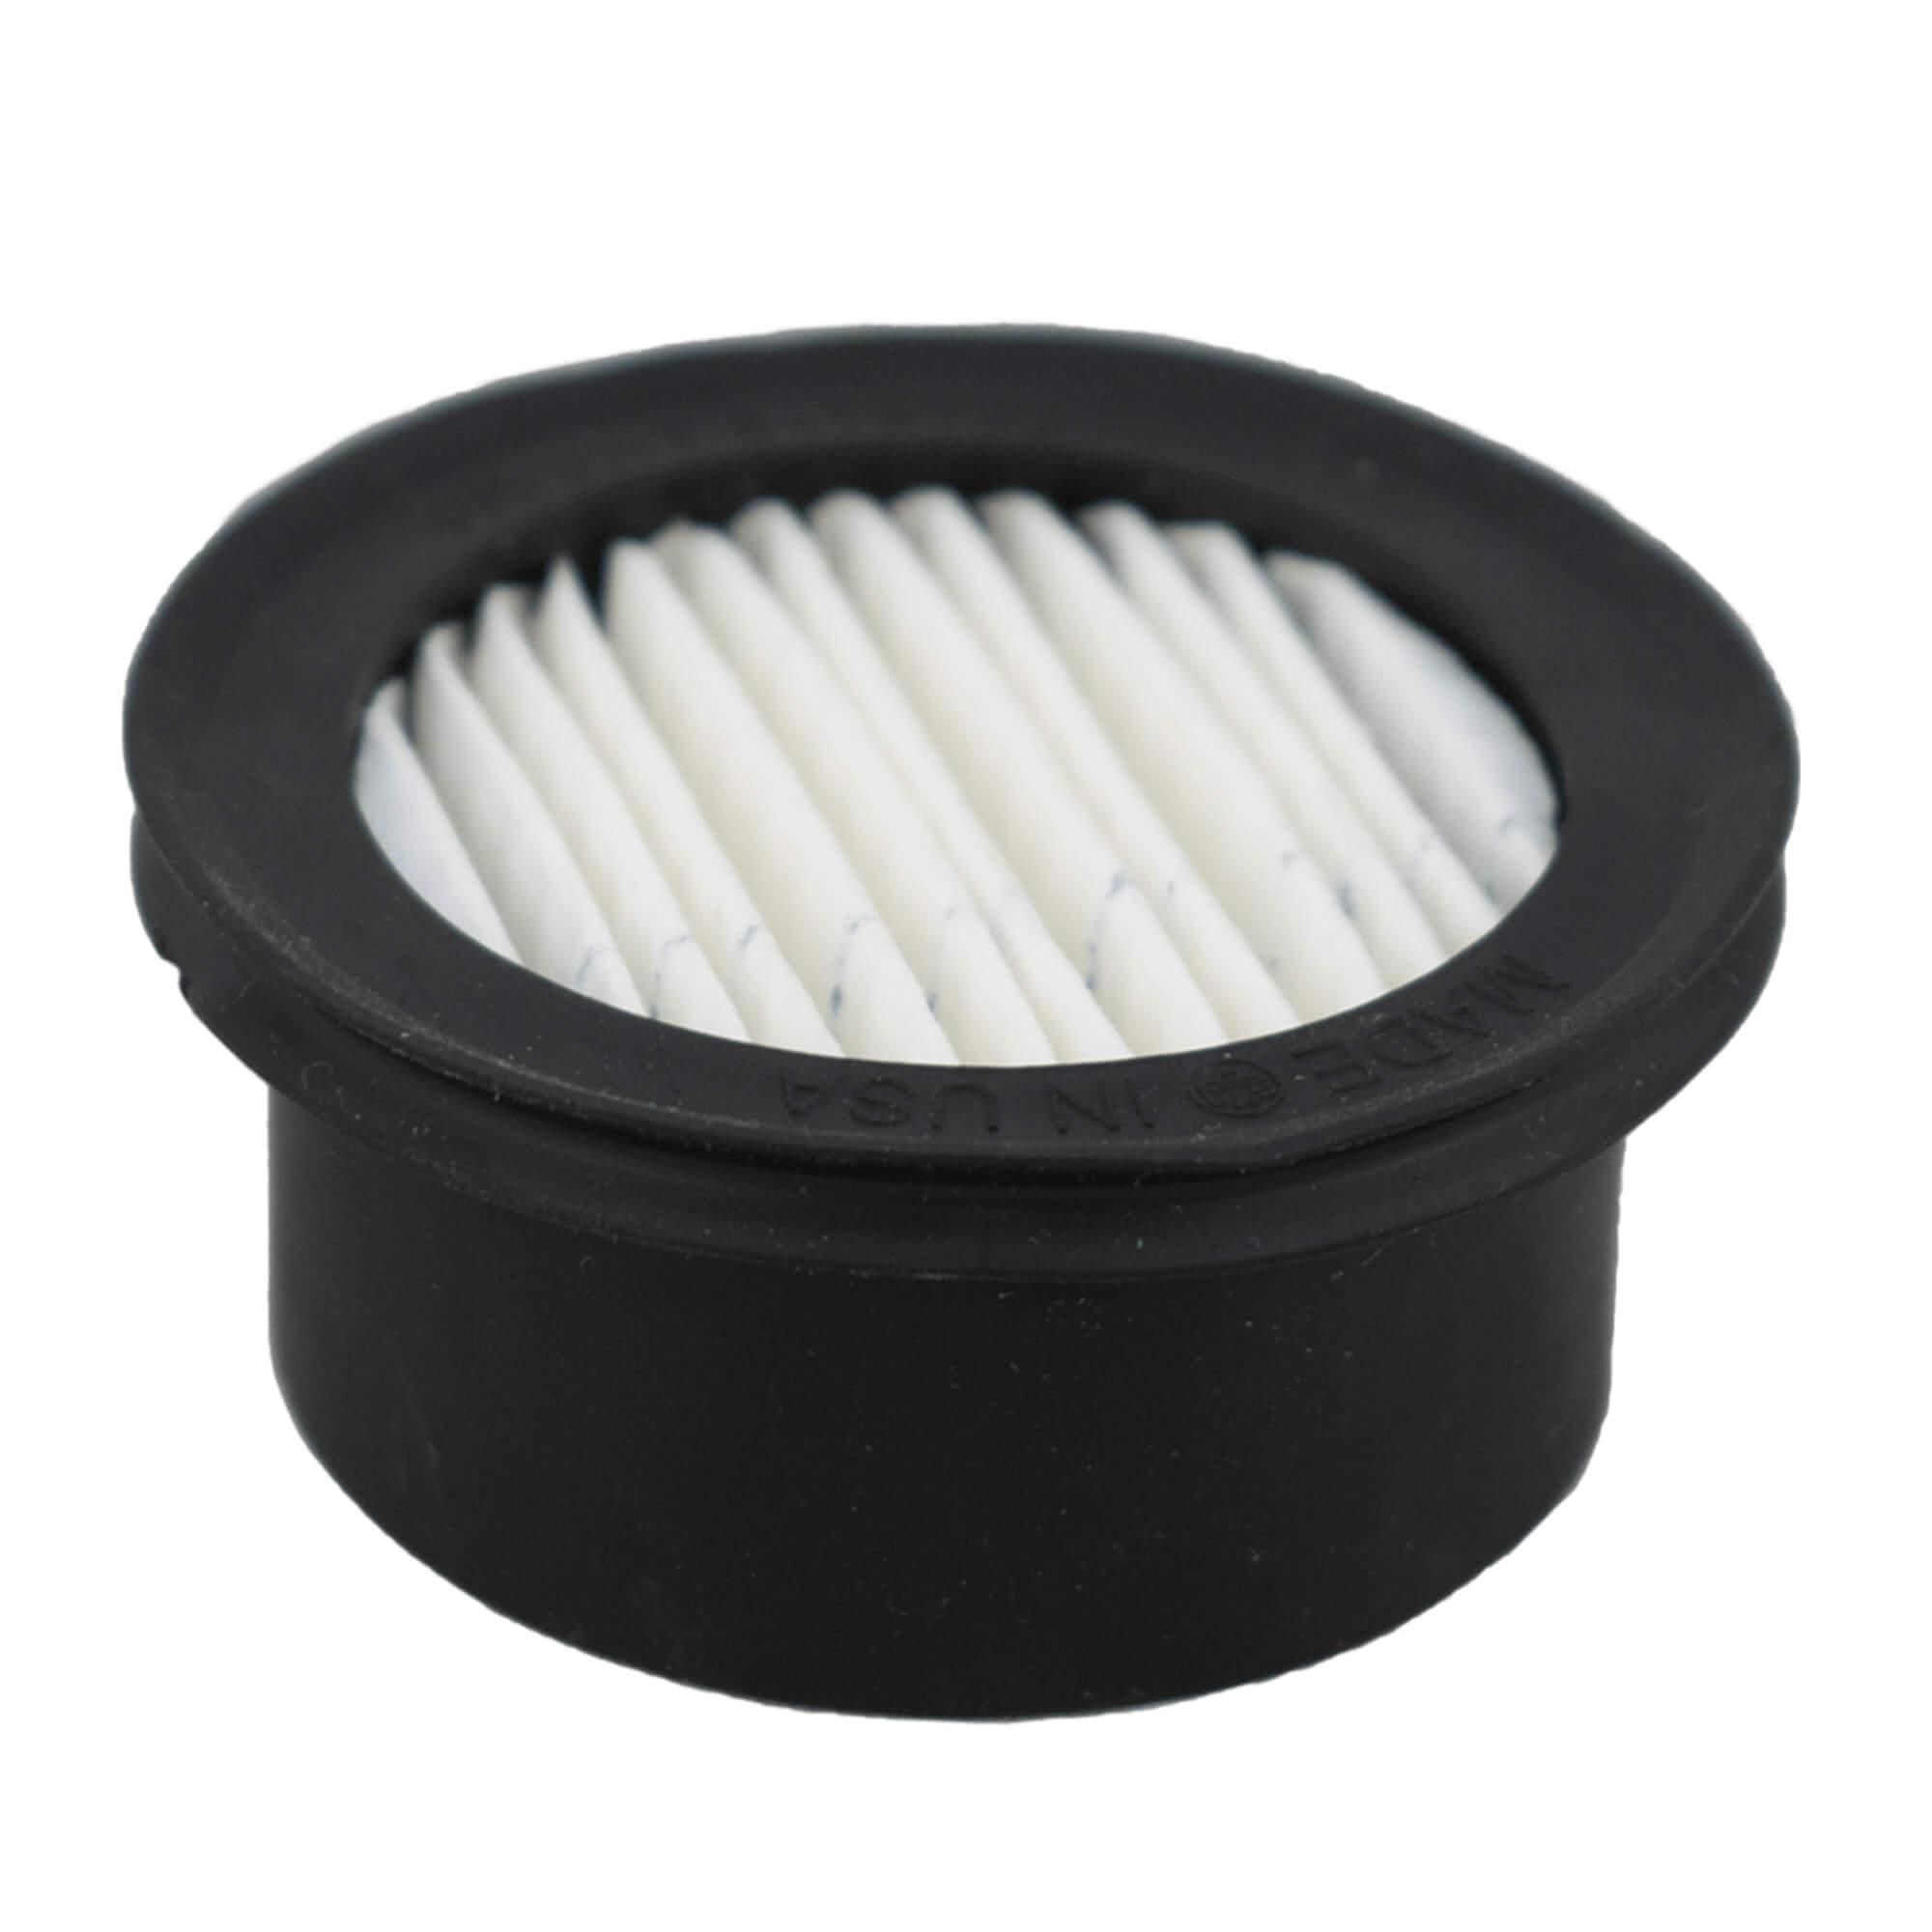 Air Filter Element for 1/4 & 1/2 HP Aeration Compressors